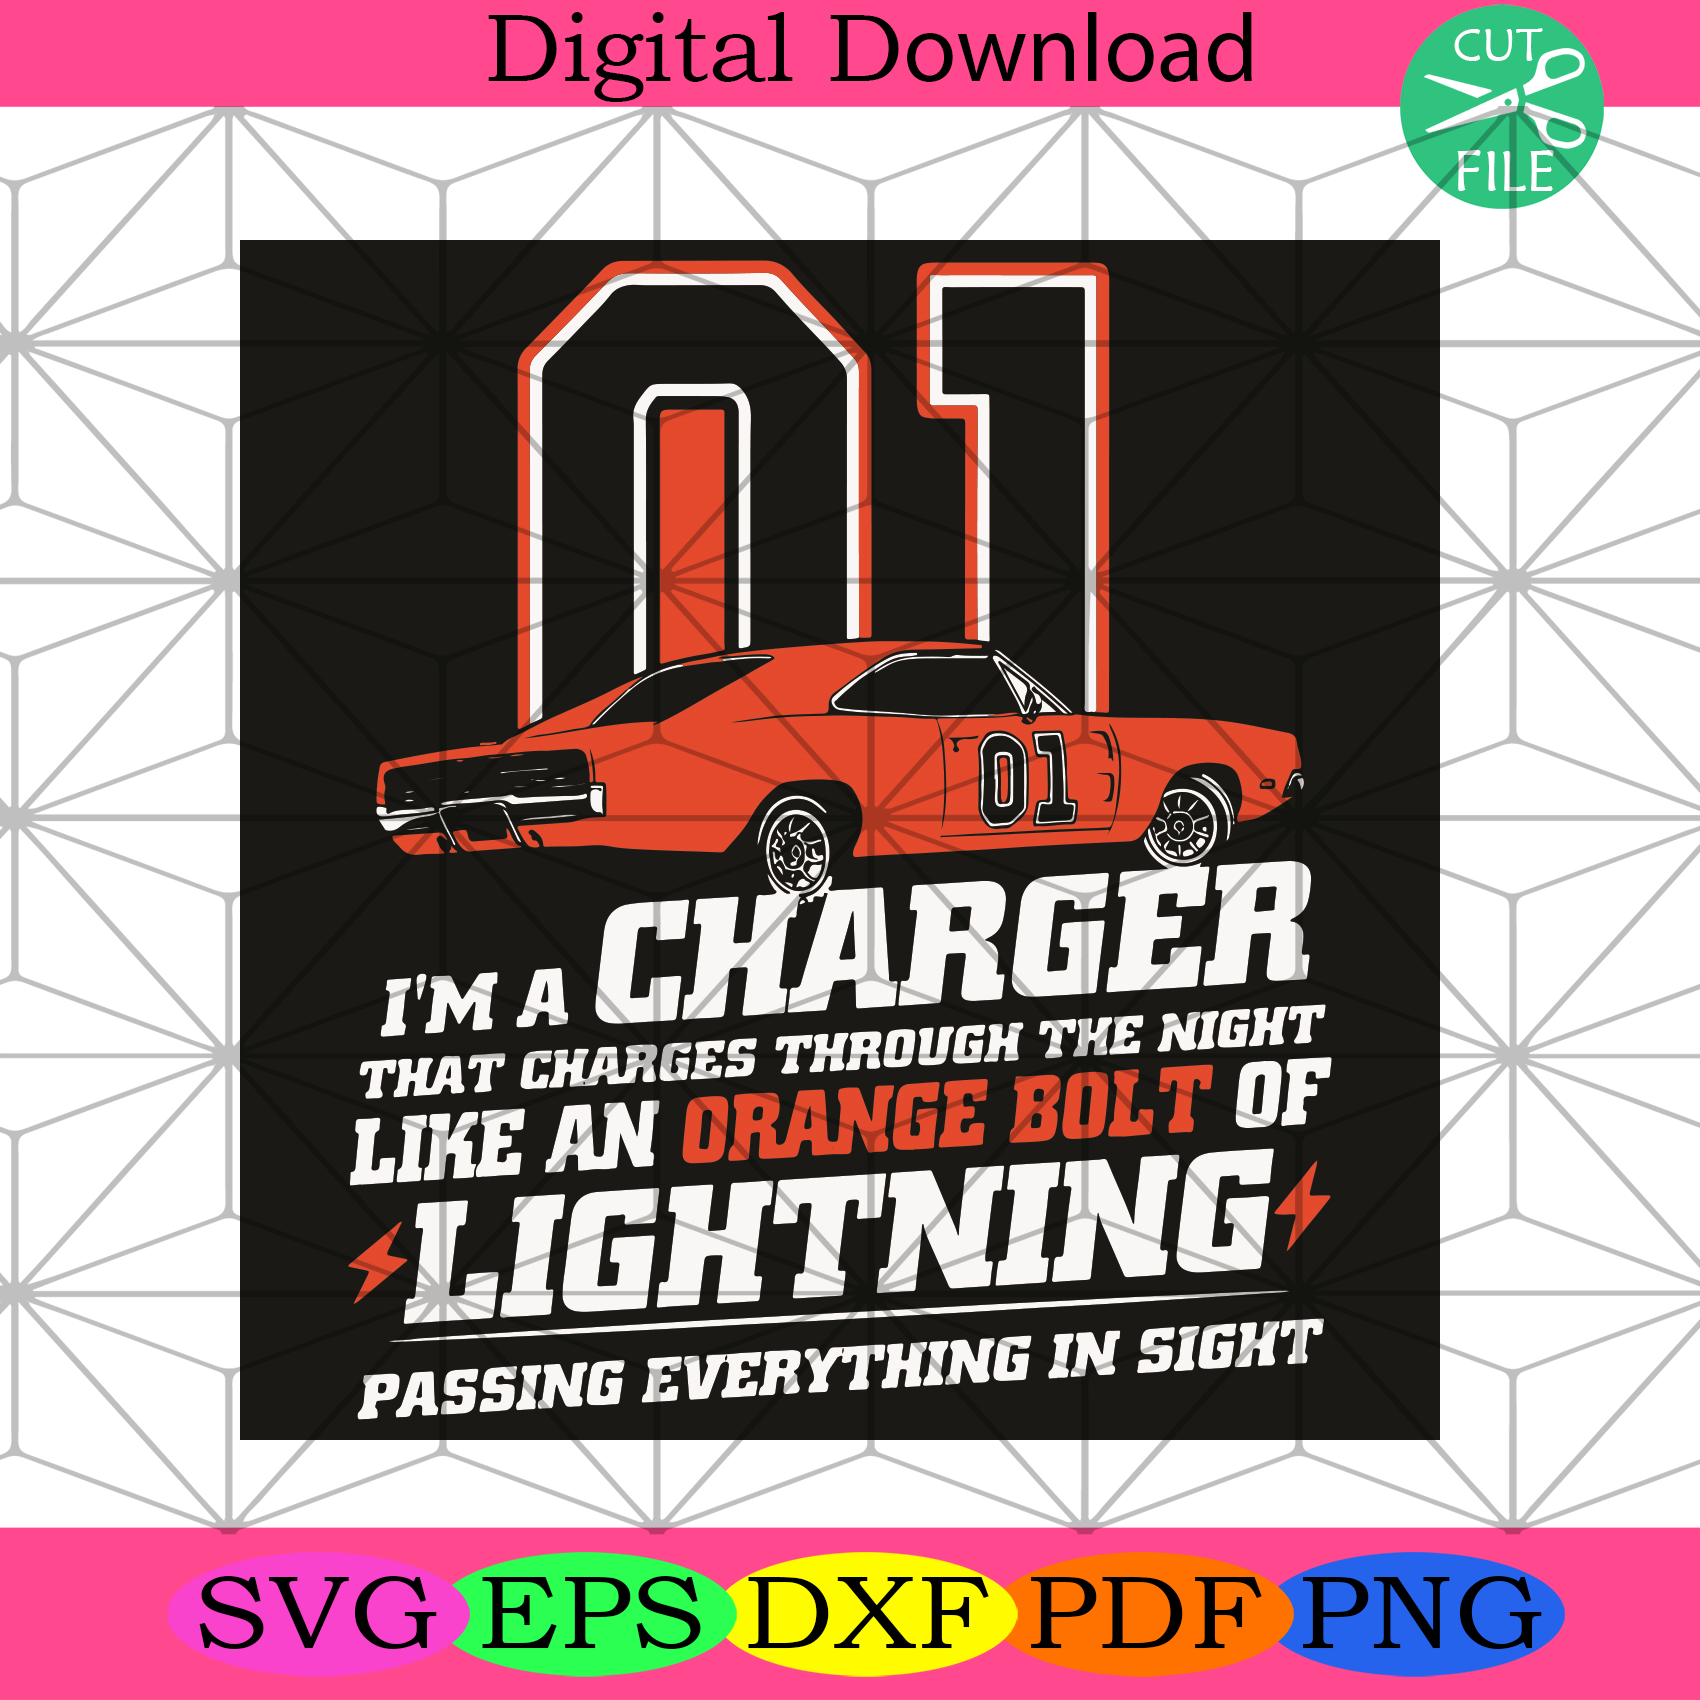 I Am A Charger That Charges Through The Night Like An Orange Bolt Of L